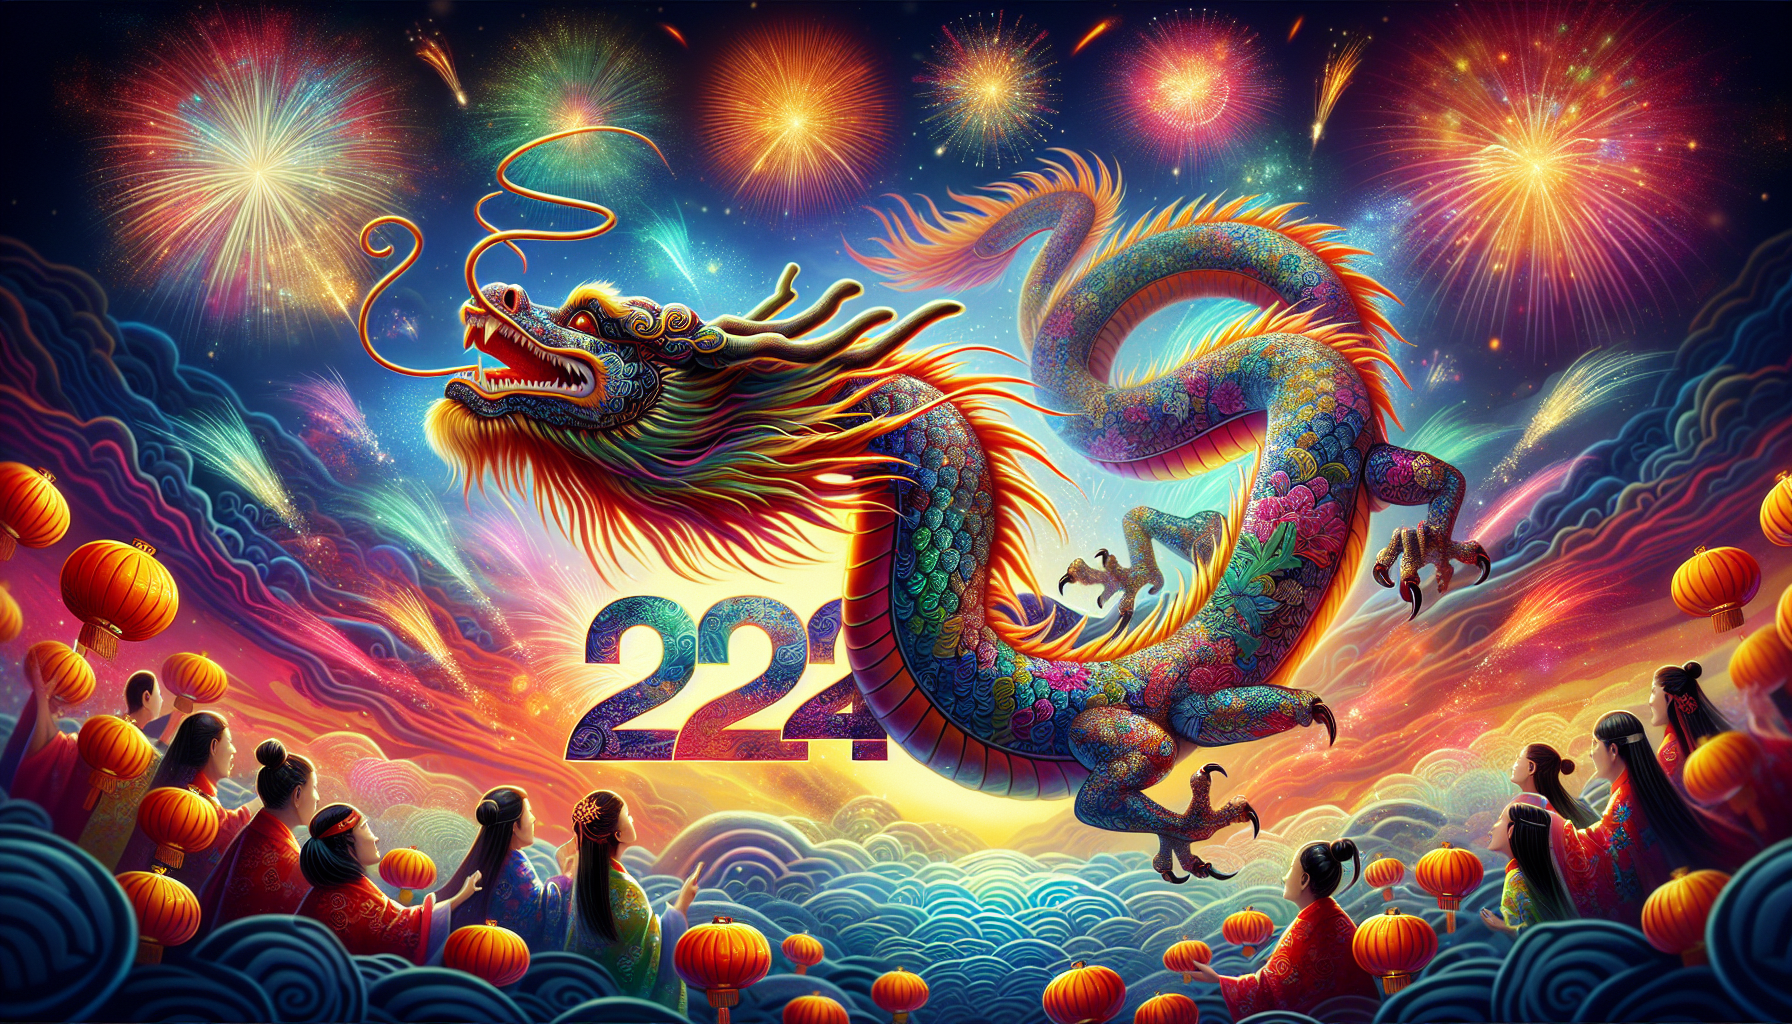 Illustration of the Year of the Dragon